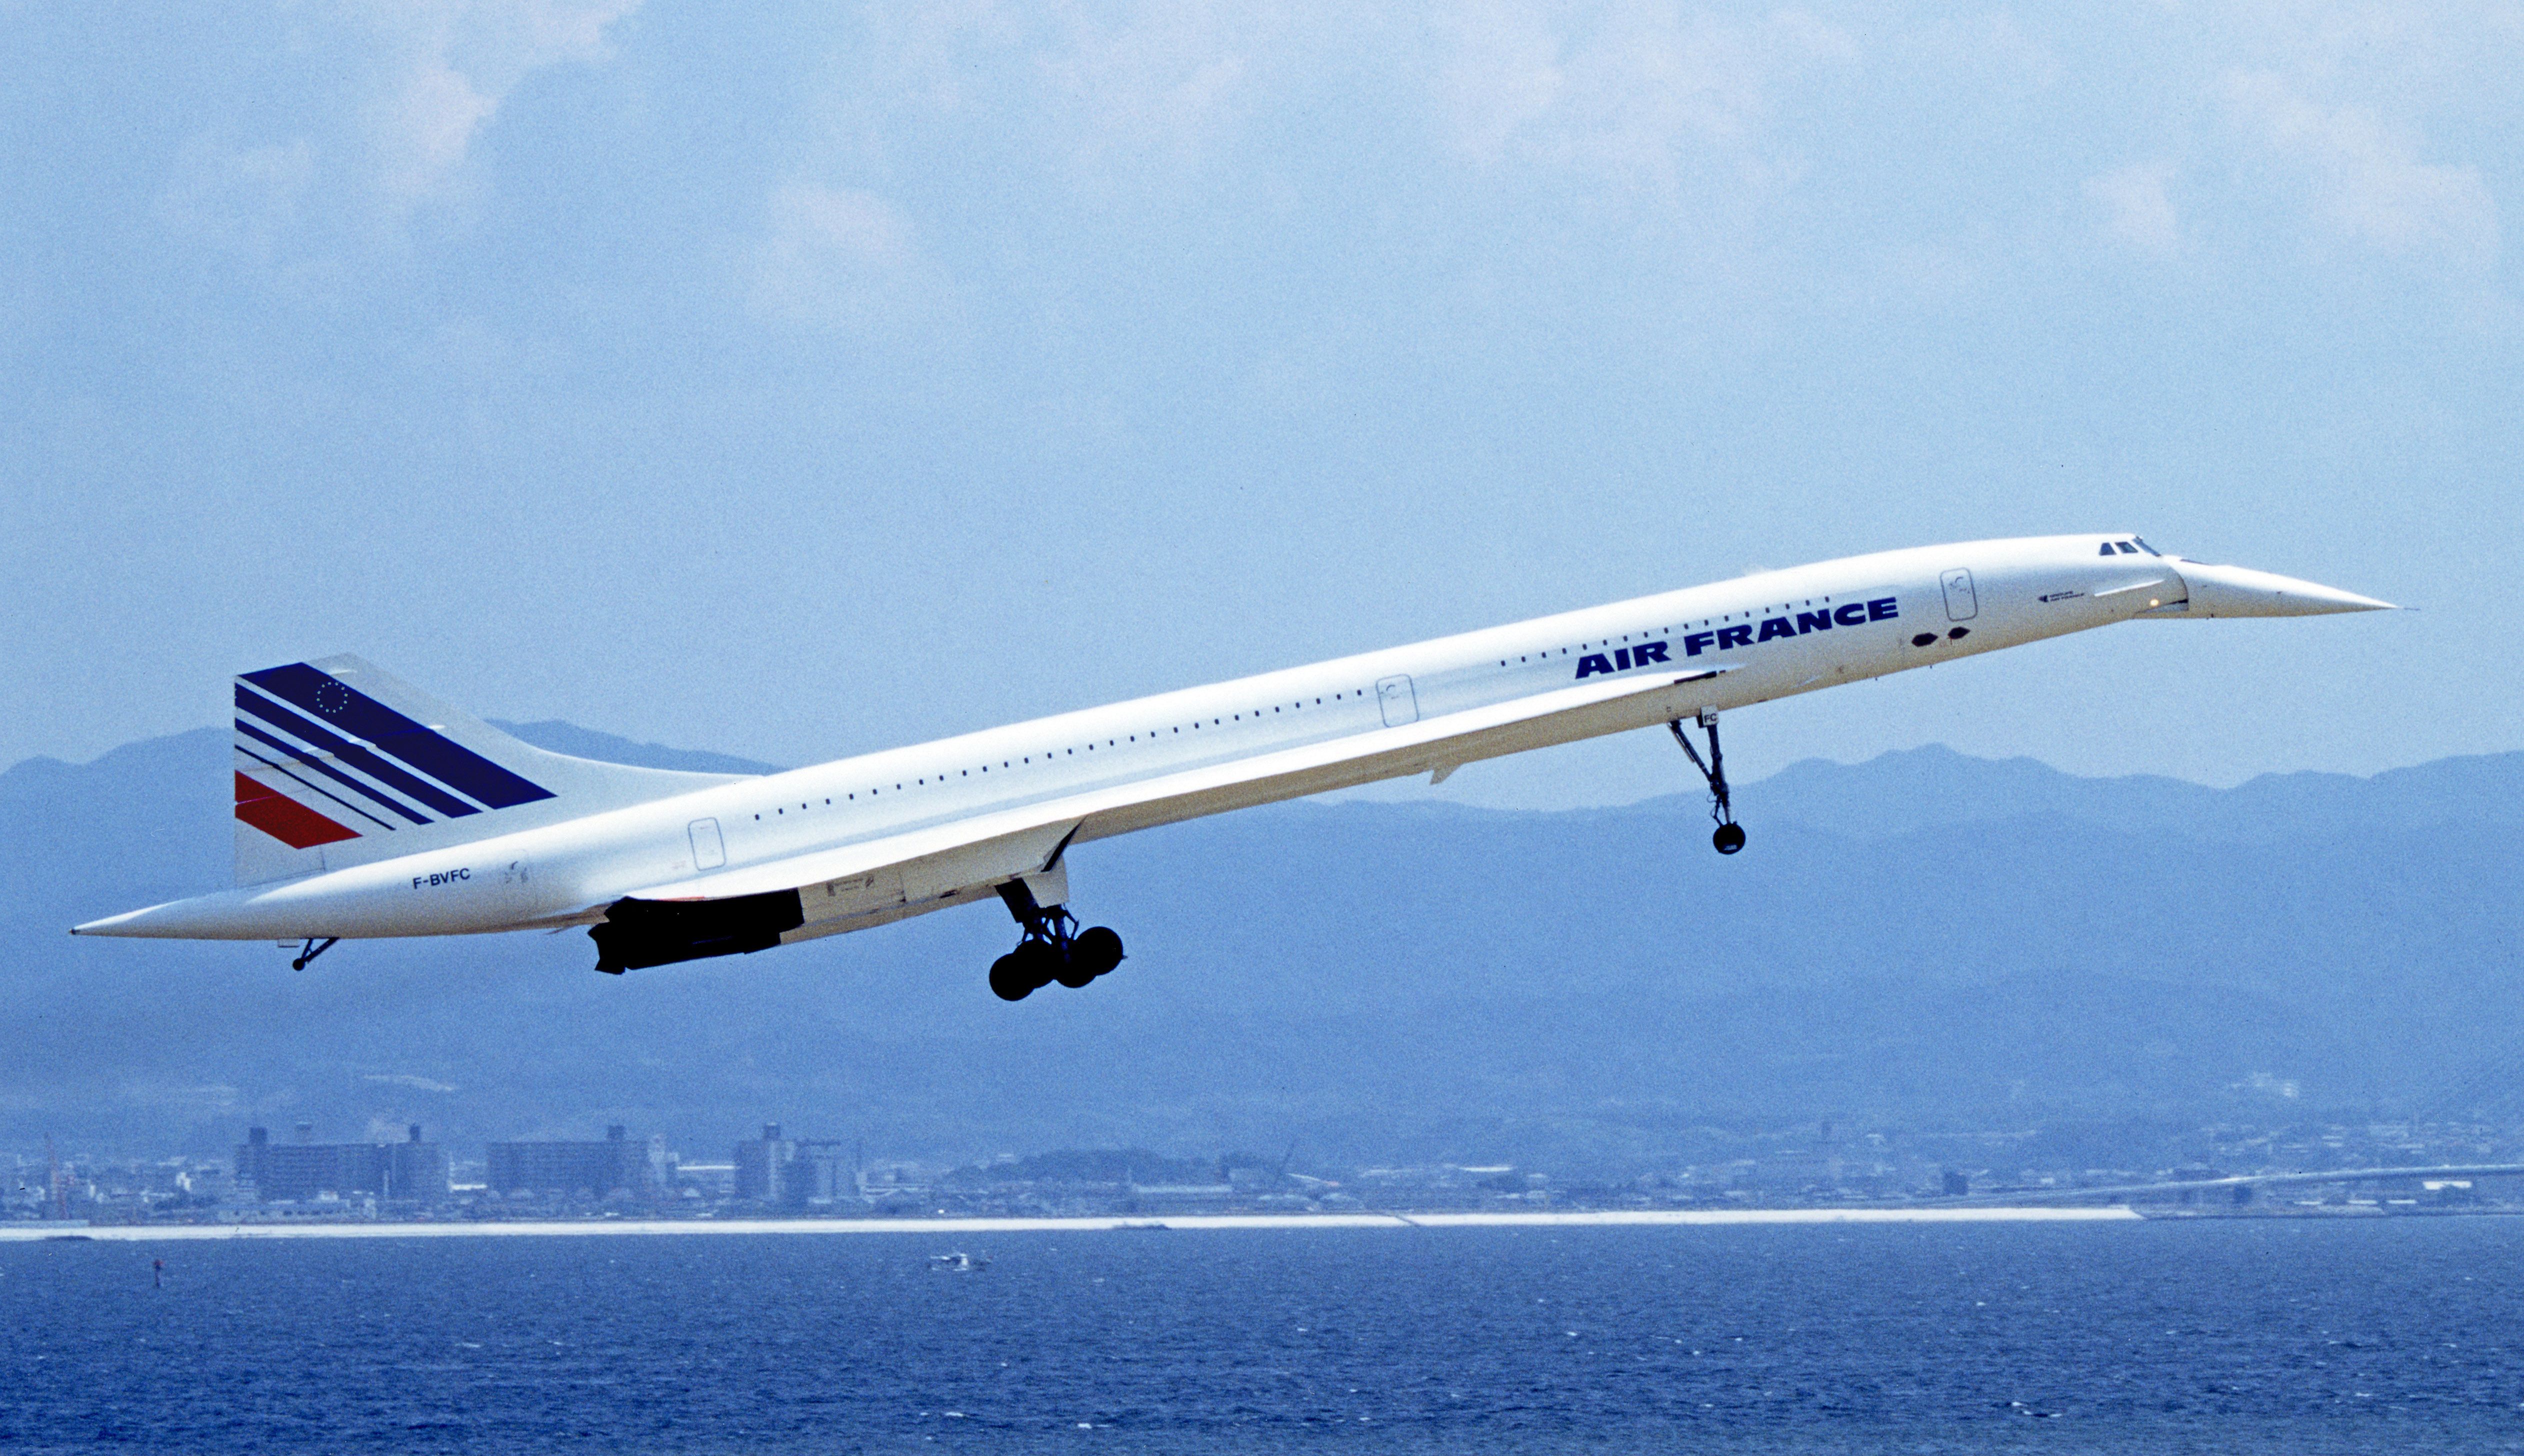 An Air France Concorde just after take off.